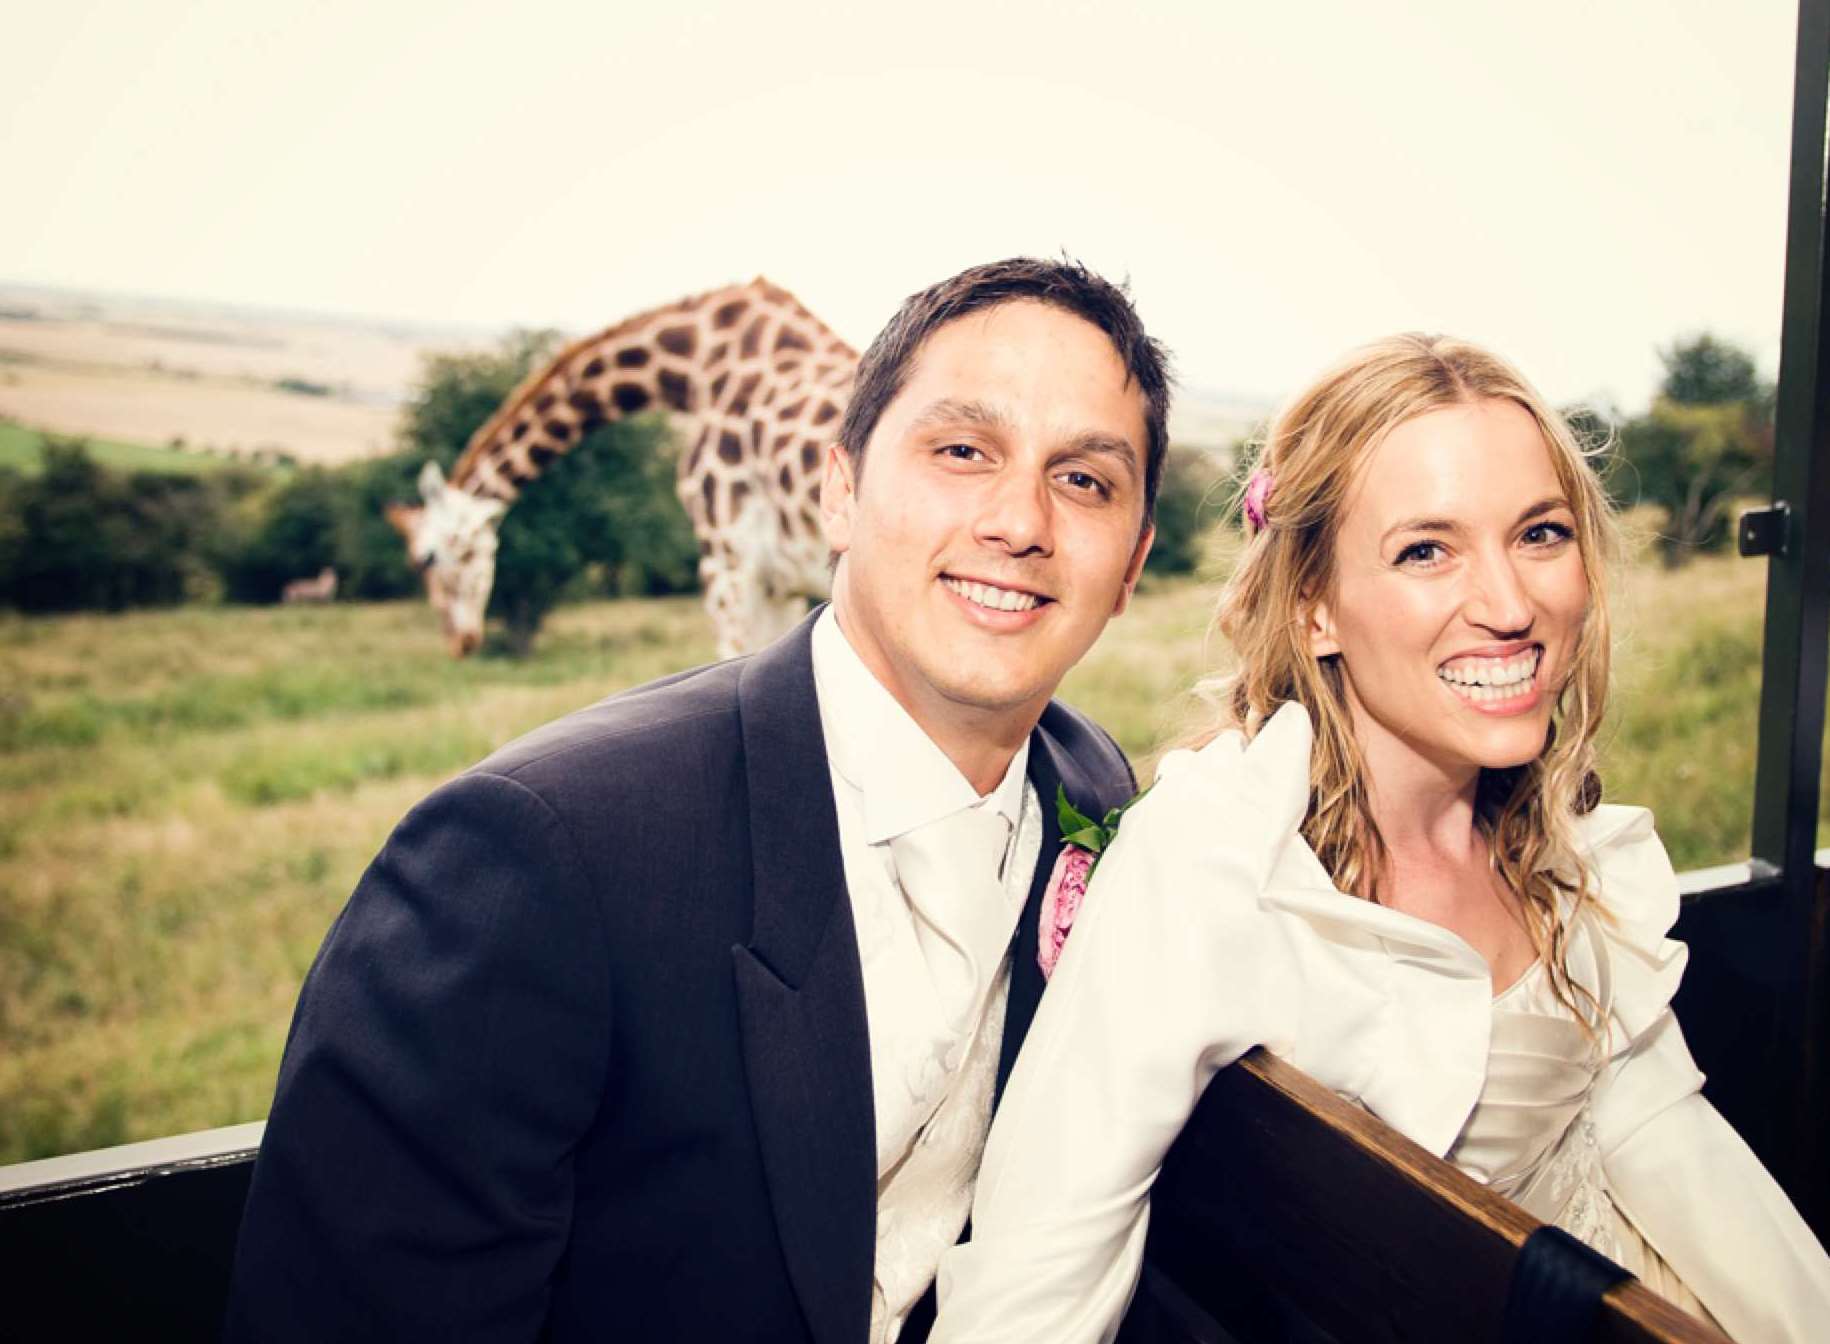 Go wild on your wedding day at Port Lympne